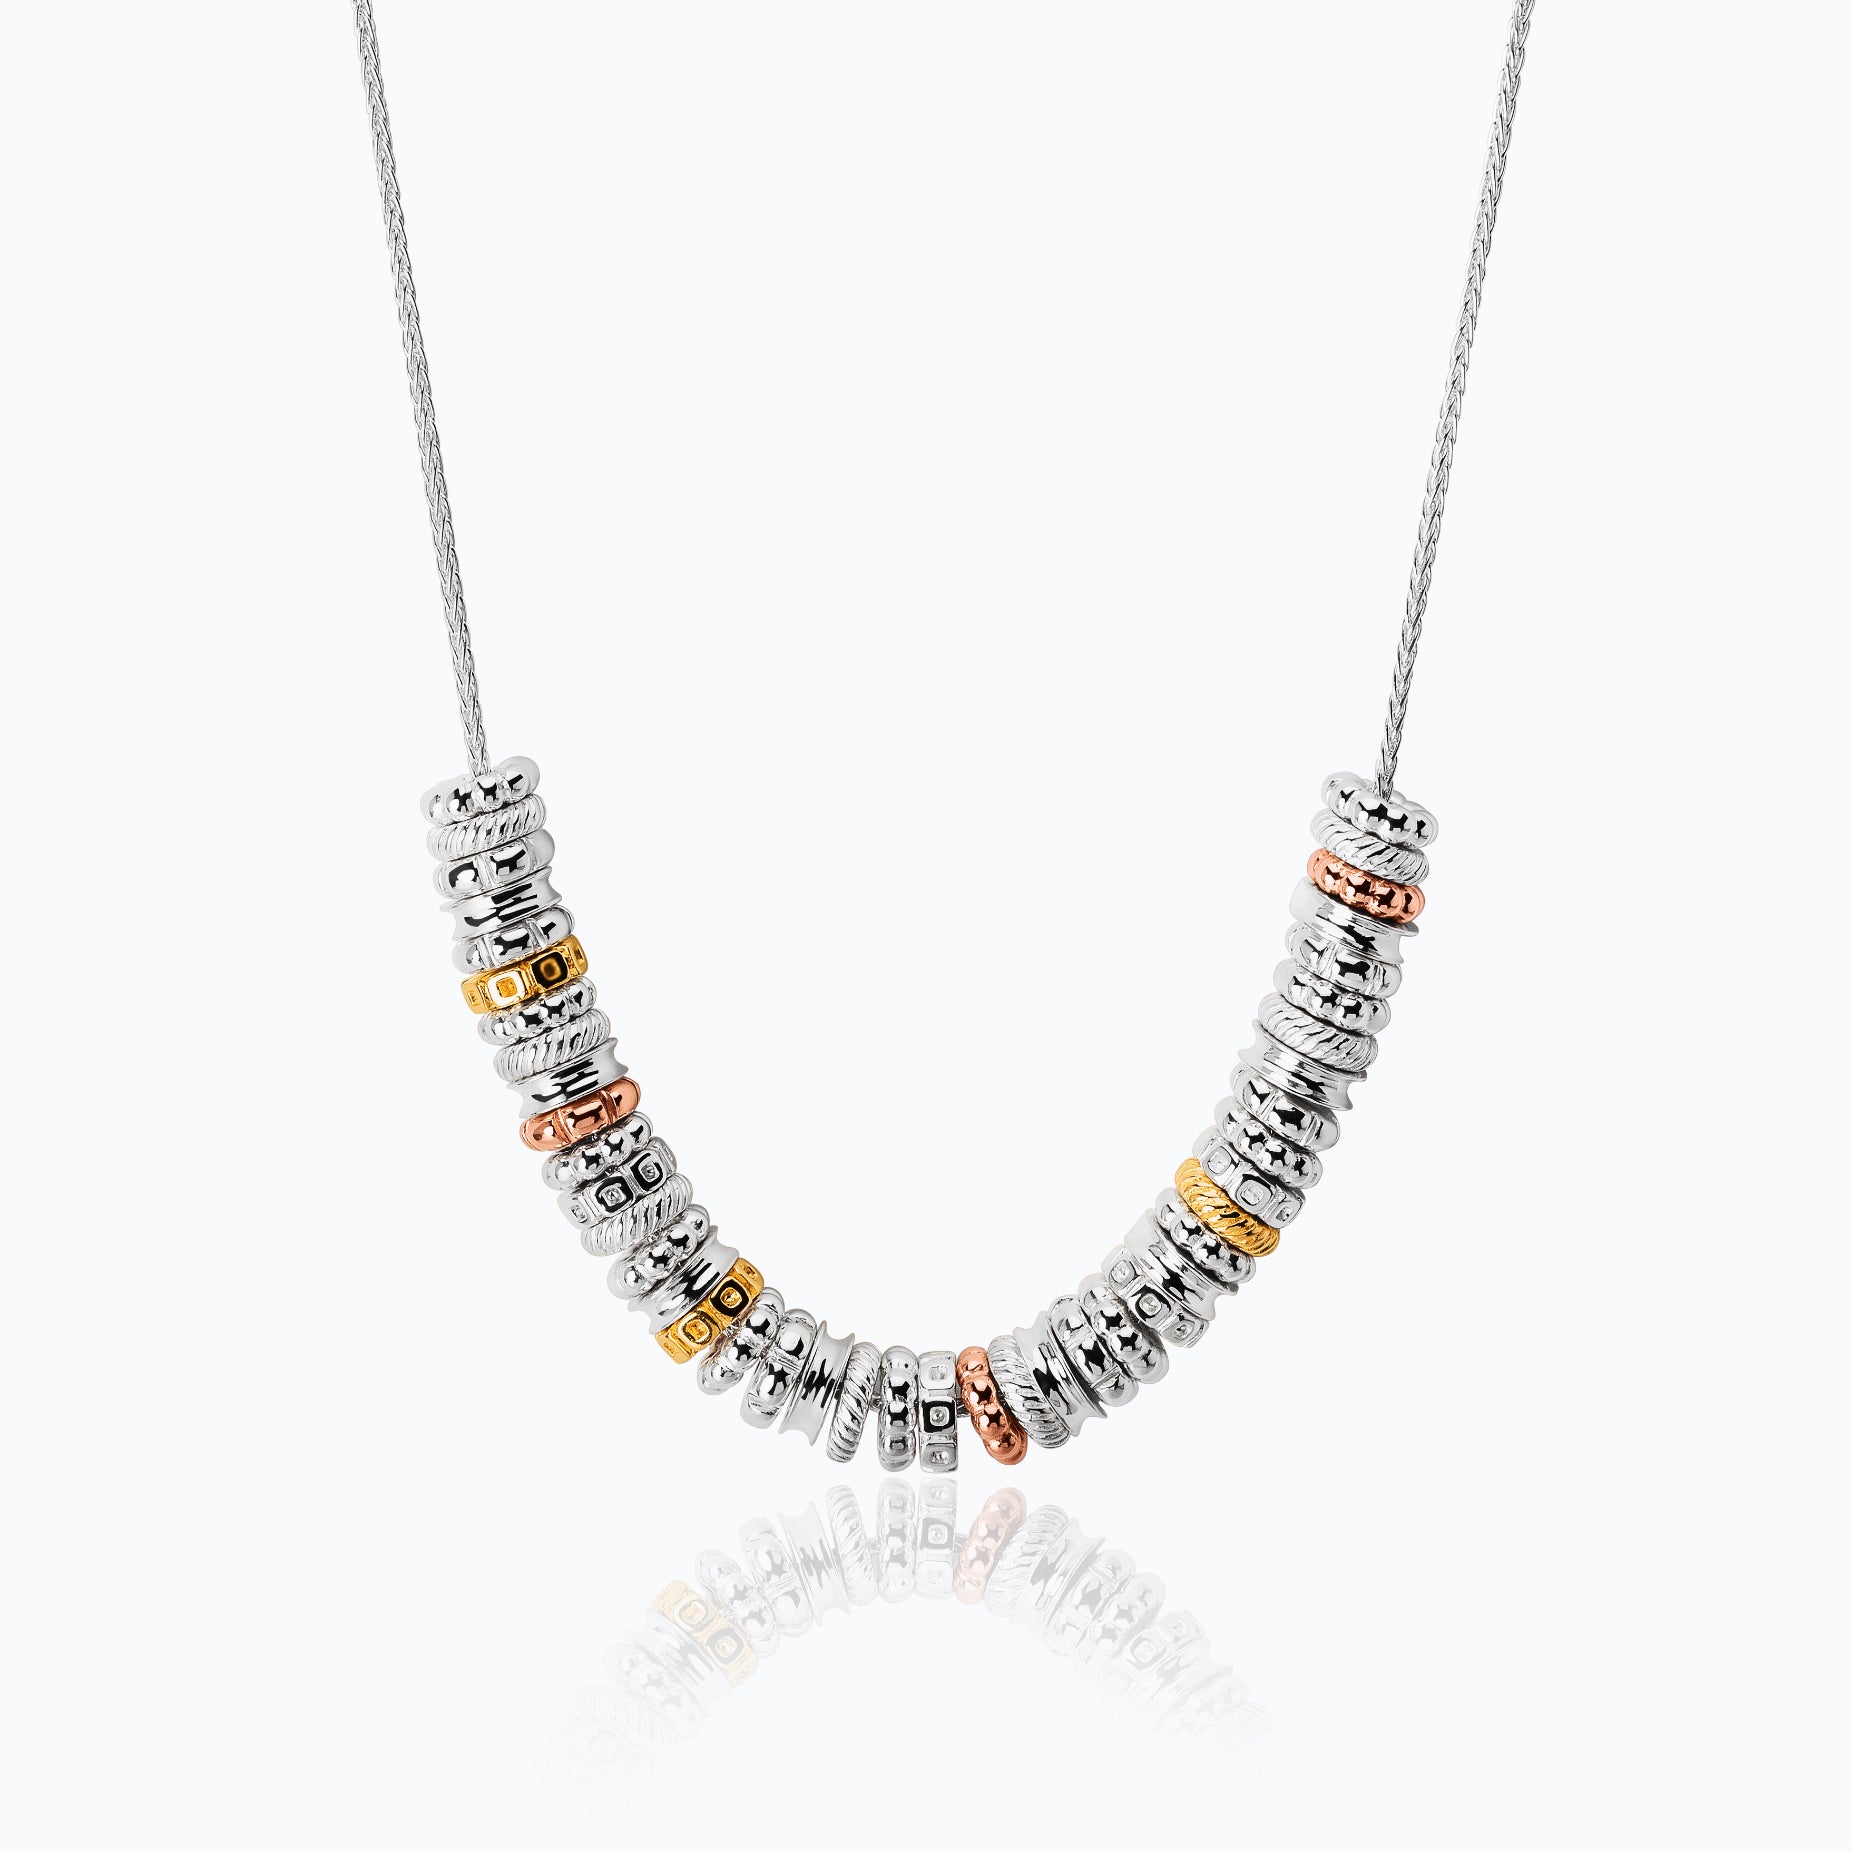 XOCOLATE JIMMIES NECKLACE